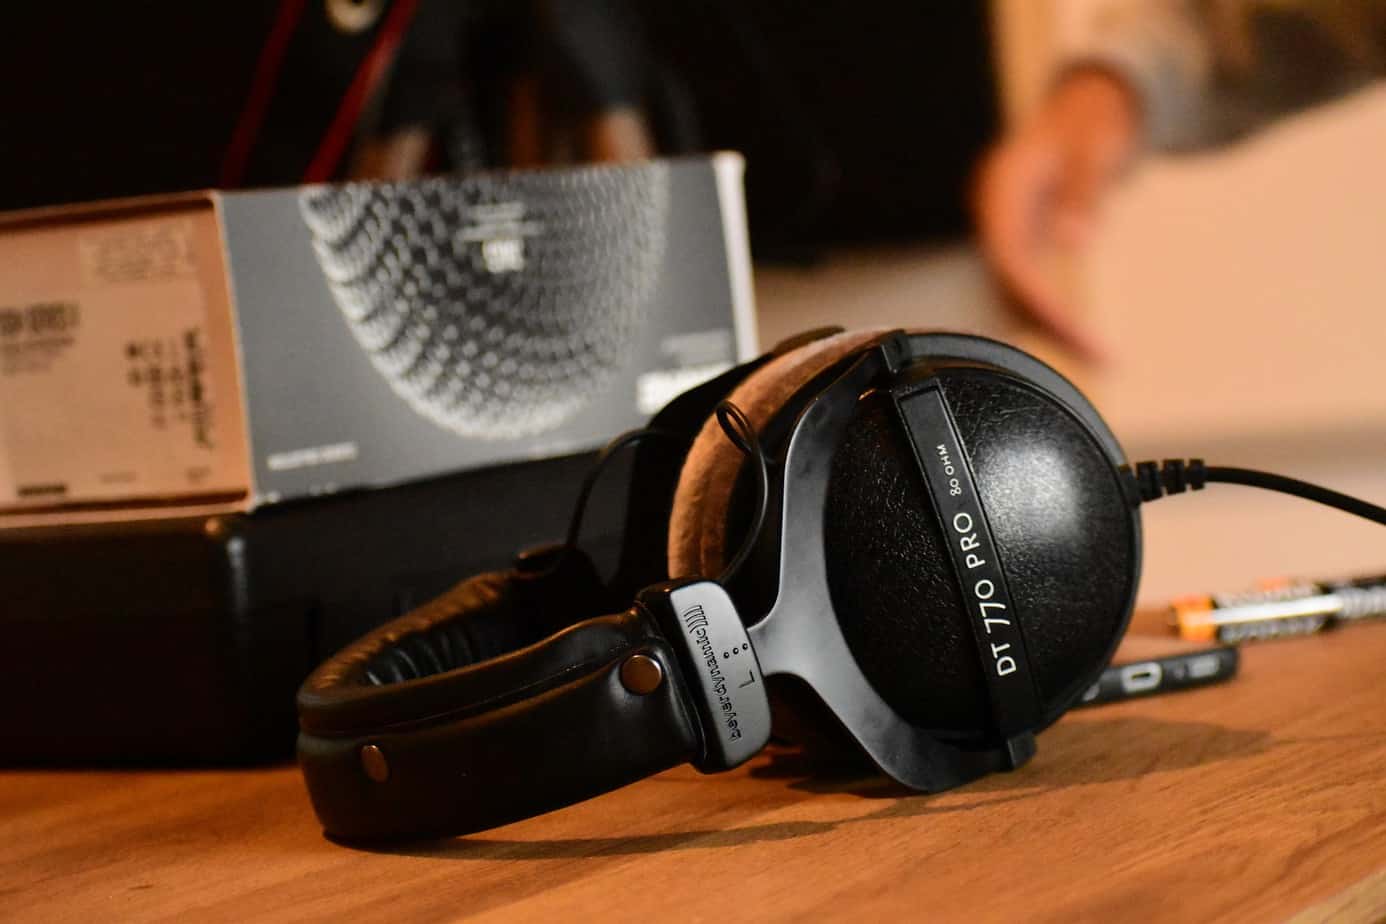 Are Studio Headphones Good For Gaming? Facts vs Myths